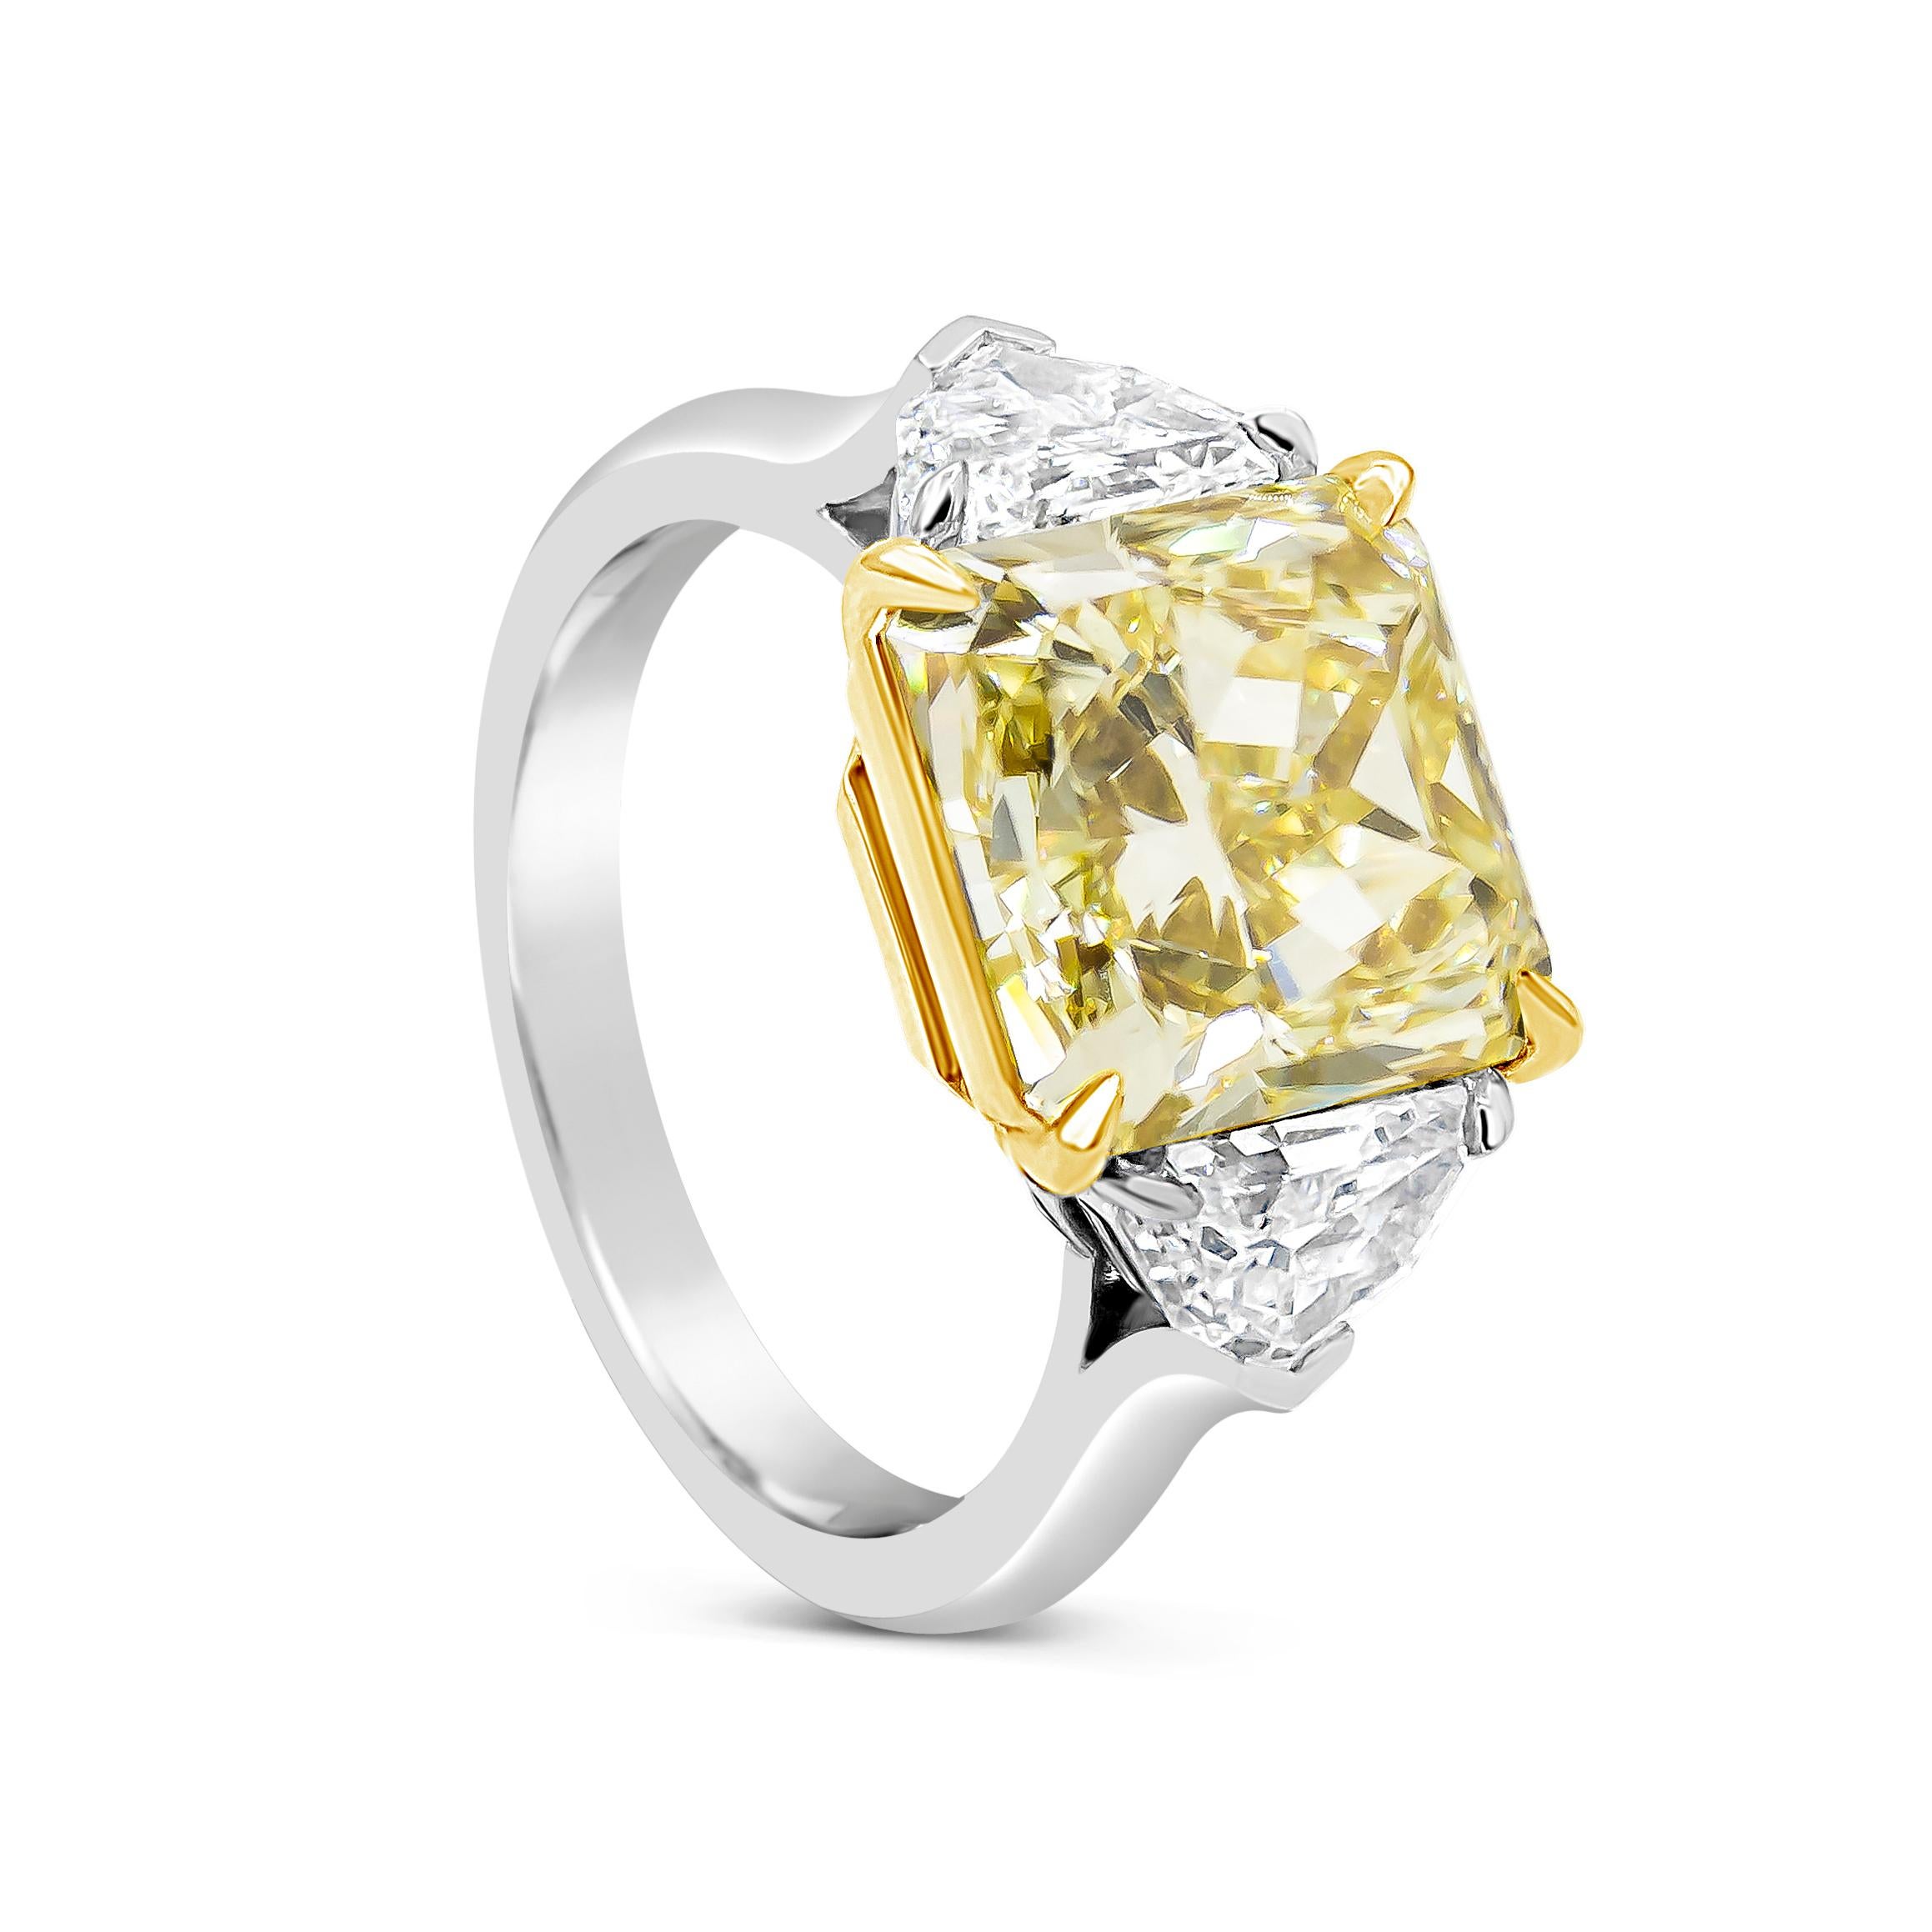 Showcasing a 3.64 carat radiant cut yellow diamond, flanked by half moon diamonds weighing 0.68 carats total. Set in an everlasting platinum mounting accented with round brilliant diamonds. GIA certified the center diamond as Fancy Yellow Color, VS2